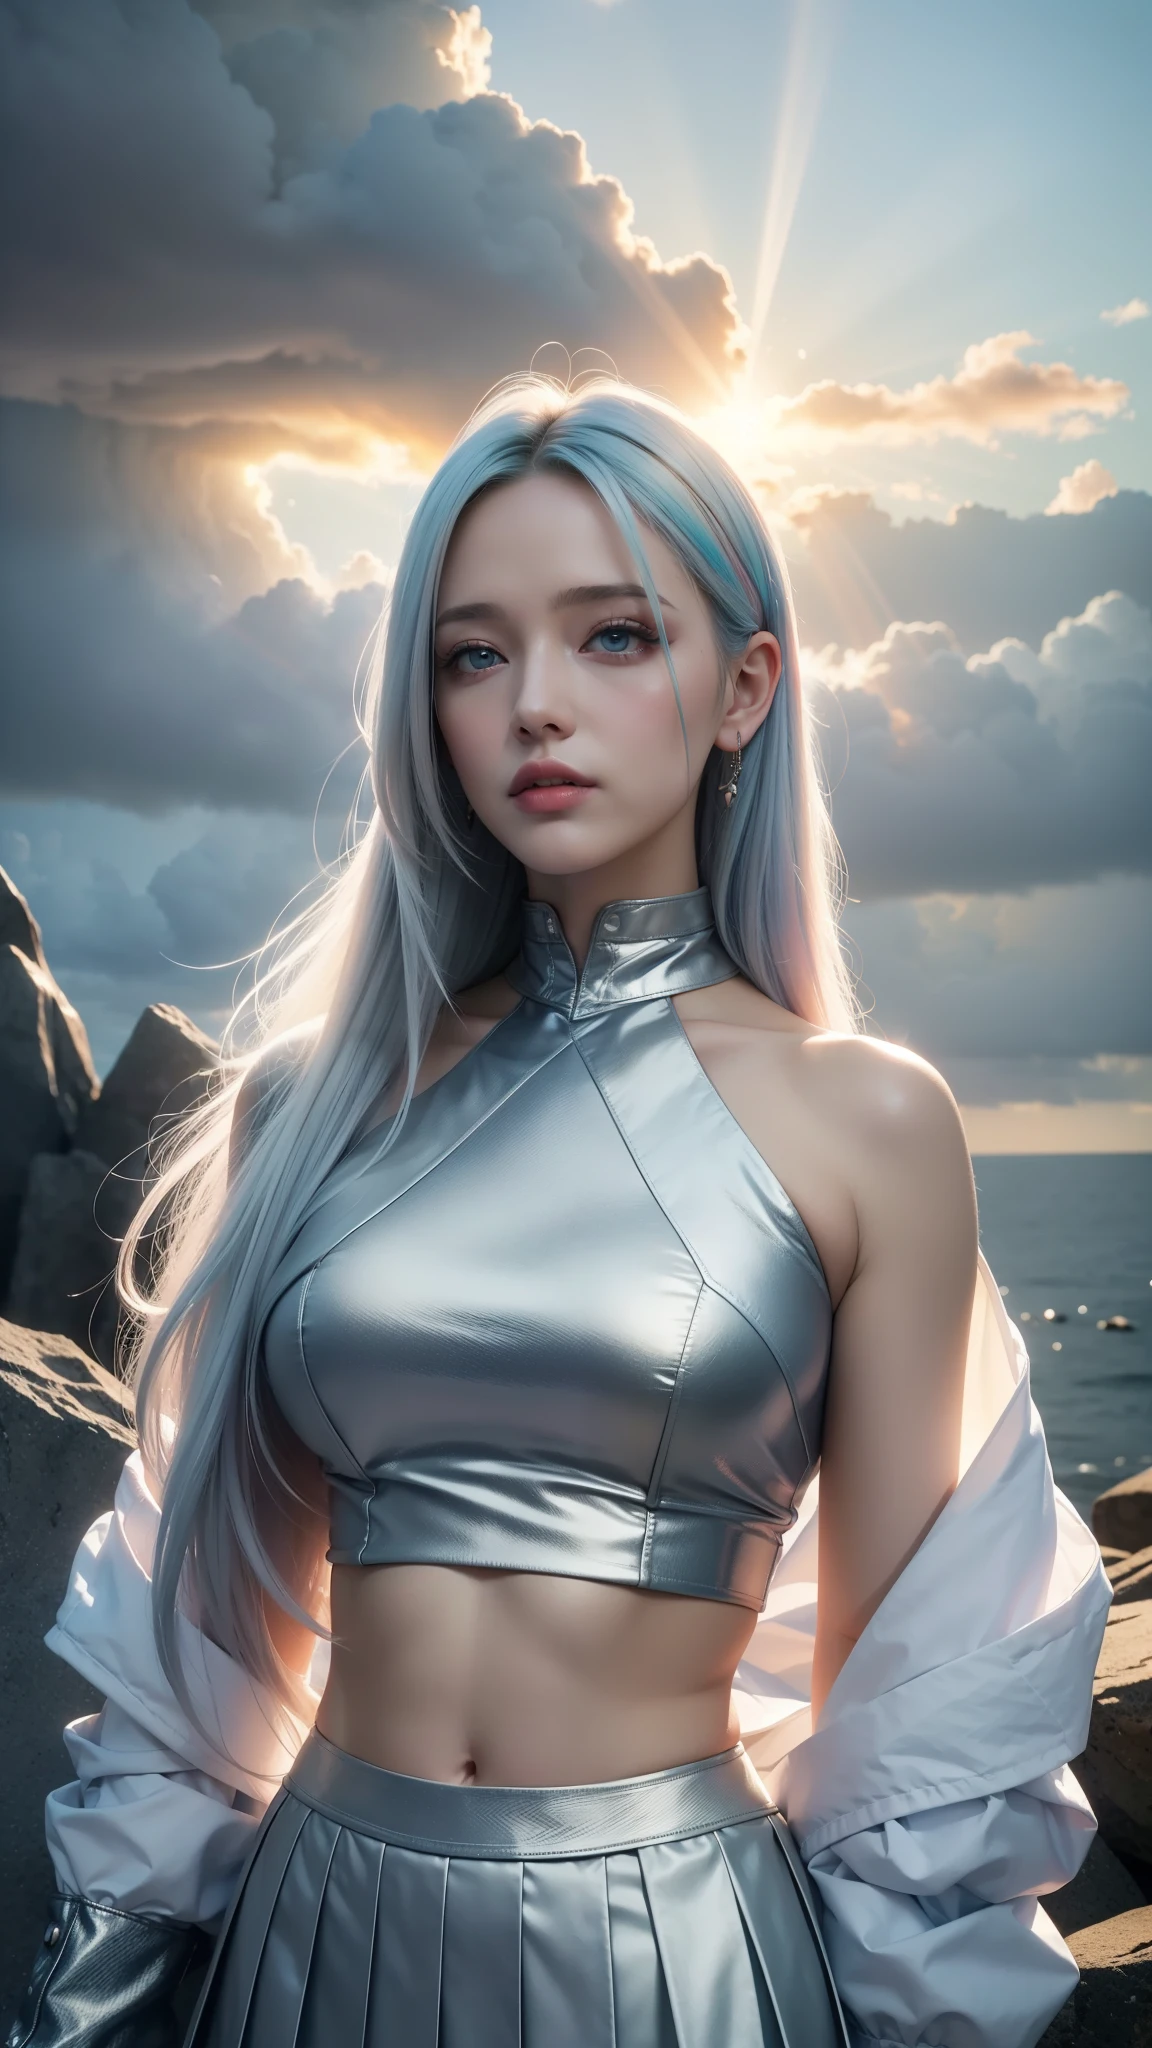 (masterpiece), the best quality, reflection light, Ultra-Wide Angle, beautiful Cloudy sky, girl, platinum blonde hair with light blue tips, multicolored hair, colored inner hair, full details white long sleeve crop top, pleated skirt, hourglass body shape, professional, Extremely aesthetic, (immersive), (cool), stylish, Extremely detailed realistic clothing, ((Cloudy sky, The sky is covered with clouds, Sunlight breaking through the cloud, Tyndall Effect, Sunlight breaking through the clouds as background, high quality, high details background)), fantasy art style, high quality detailed art, fantasy mixed with realism, detailed face, glossy lips, eyeshadow, lipstick, upper body, wide shot, platinum and white color schemes,